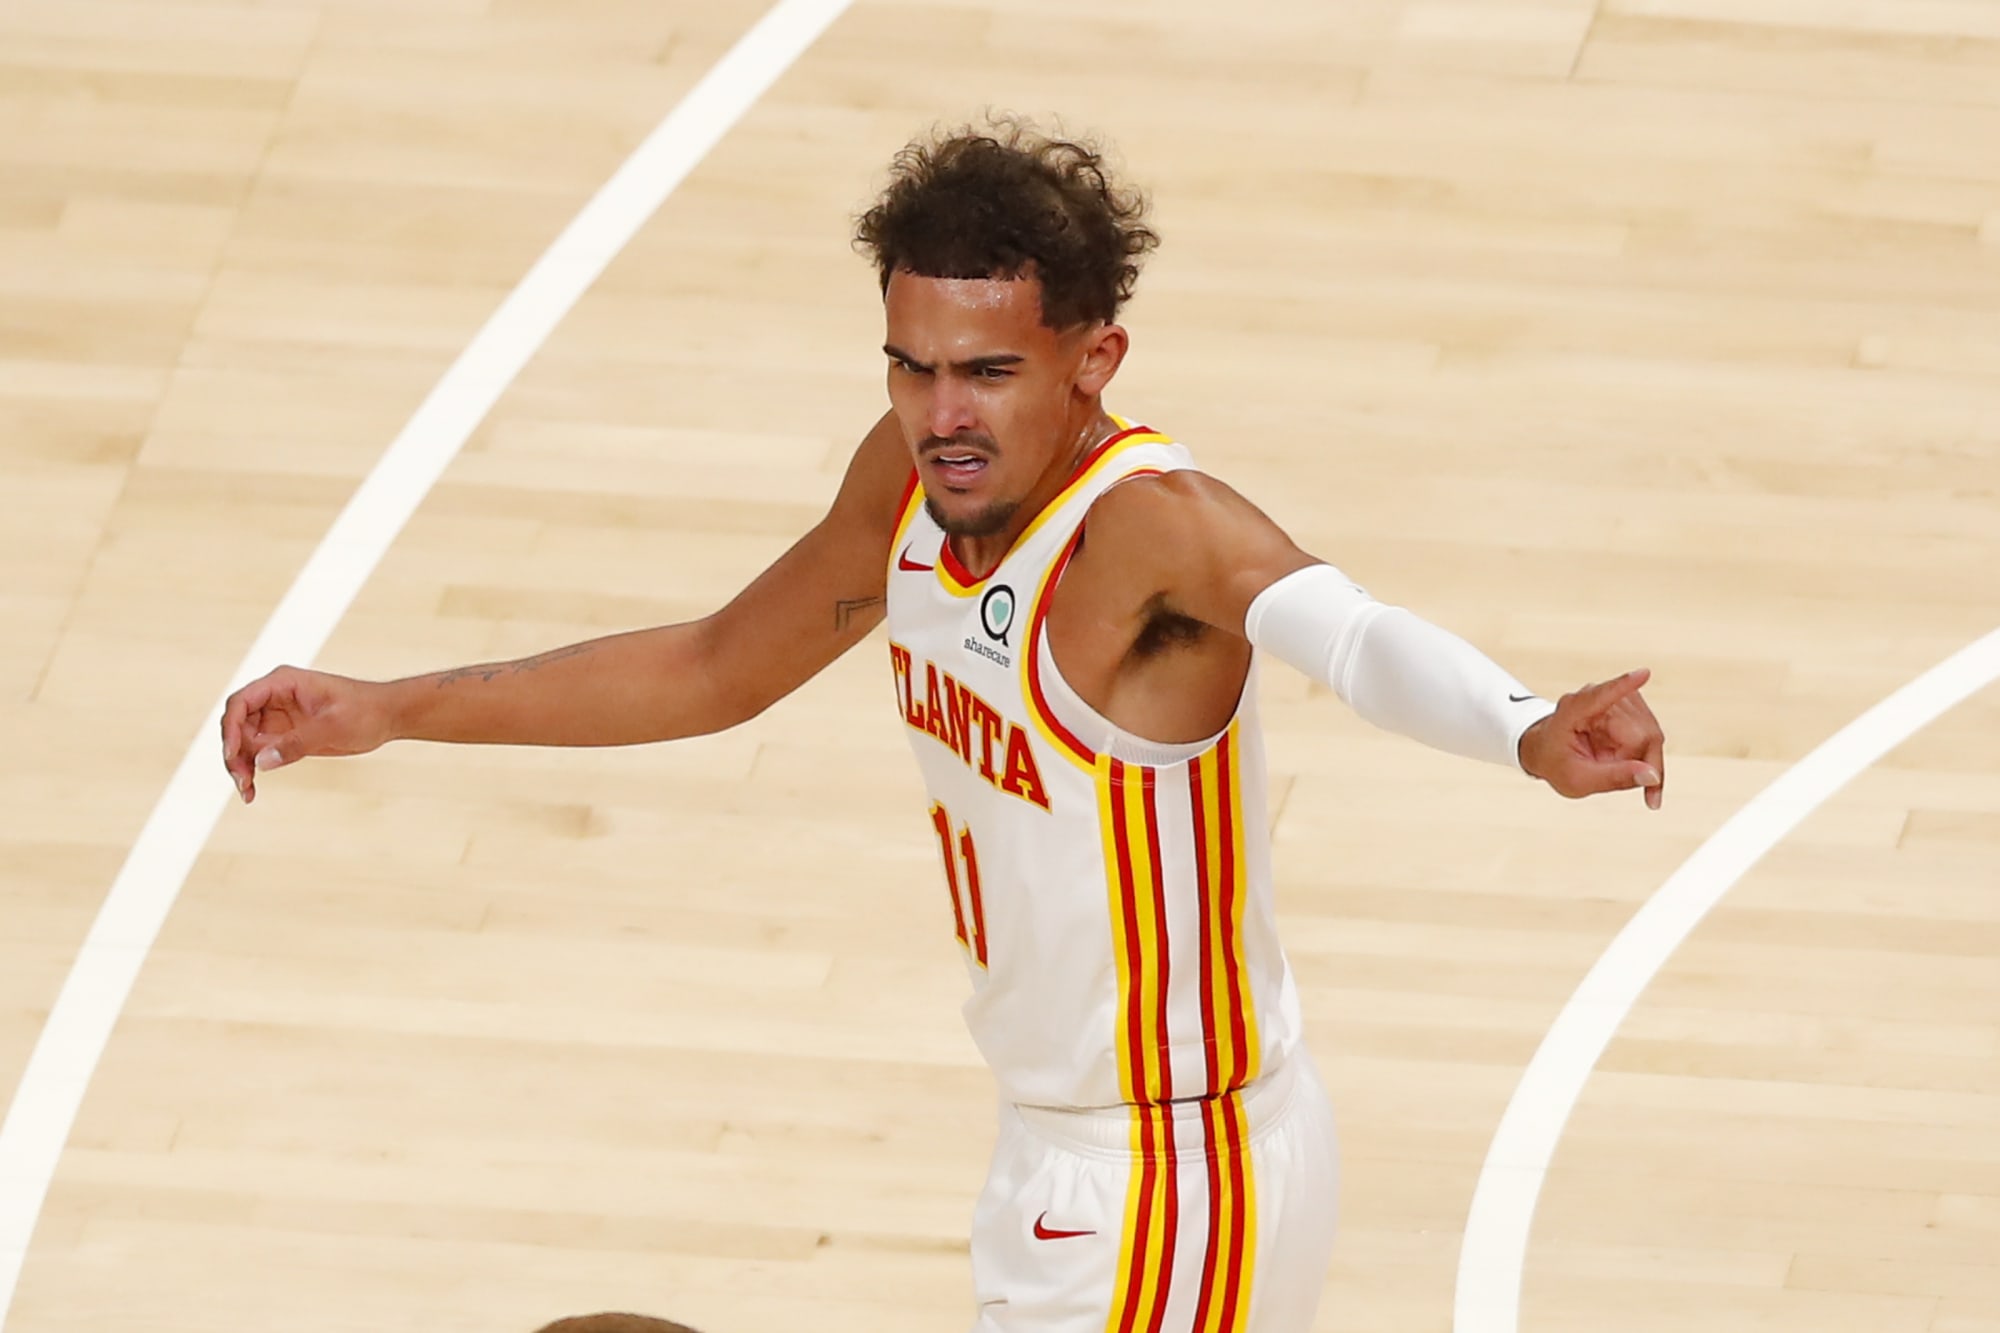 Atlanta Hawks: Trae Young has to be Ice Trae in the second half